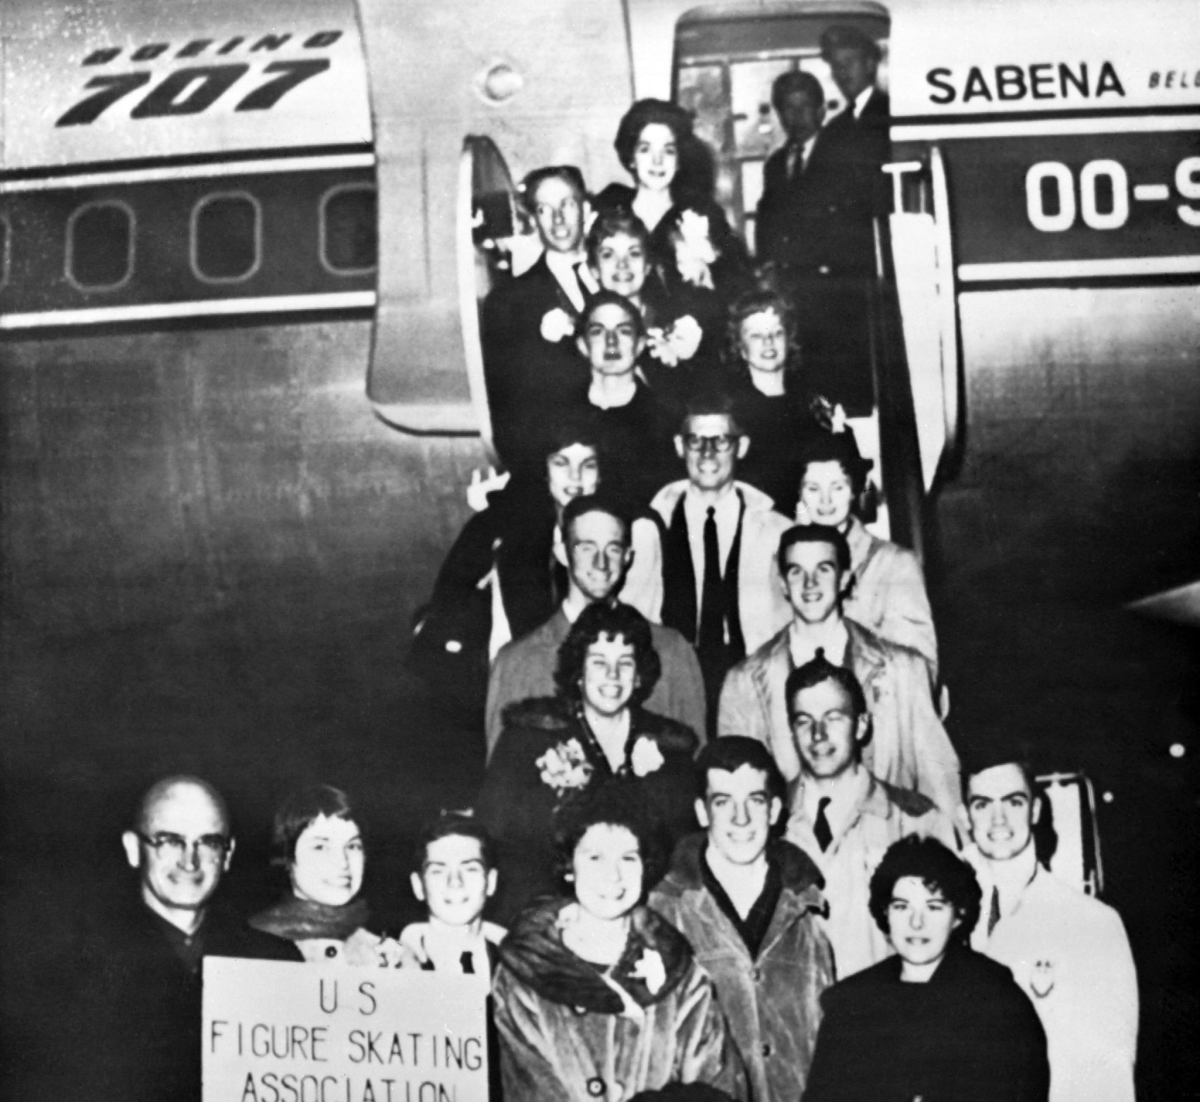 Family picture of the US figure skating team before boarding the Sabena Flight 548, on February 15, 1961 in New York.